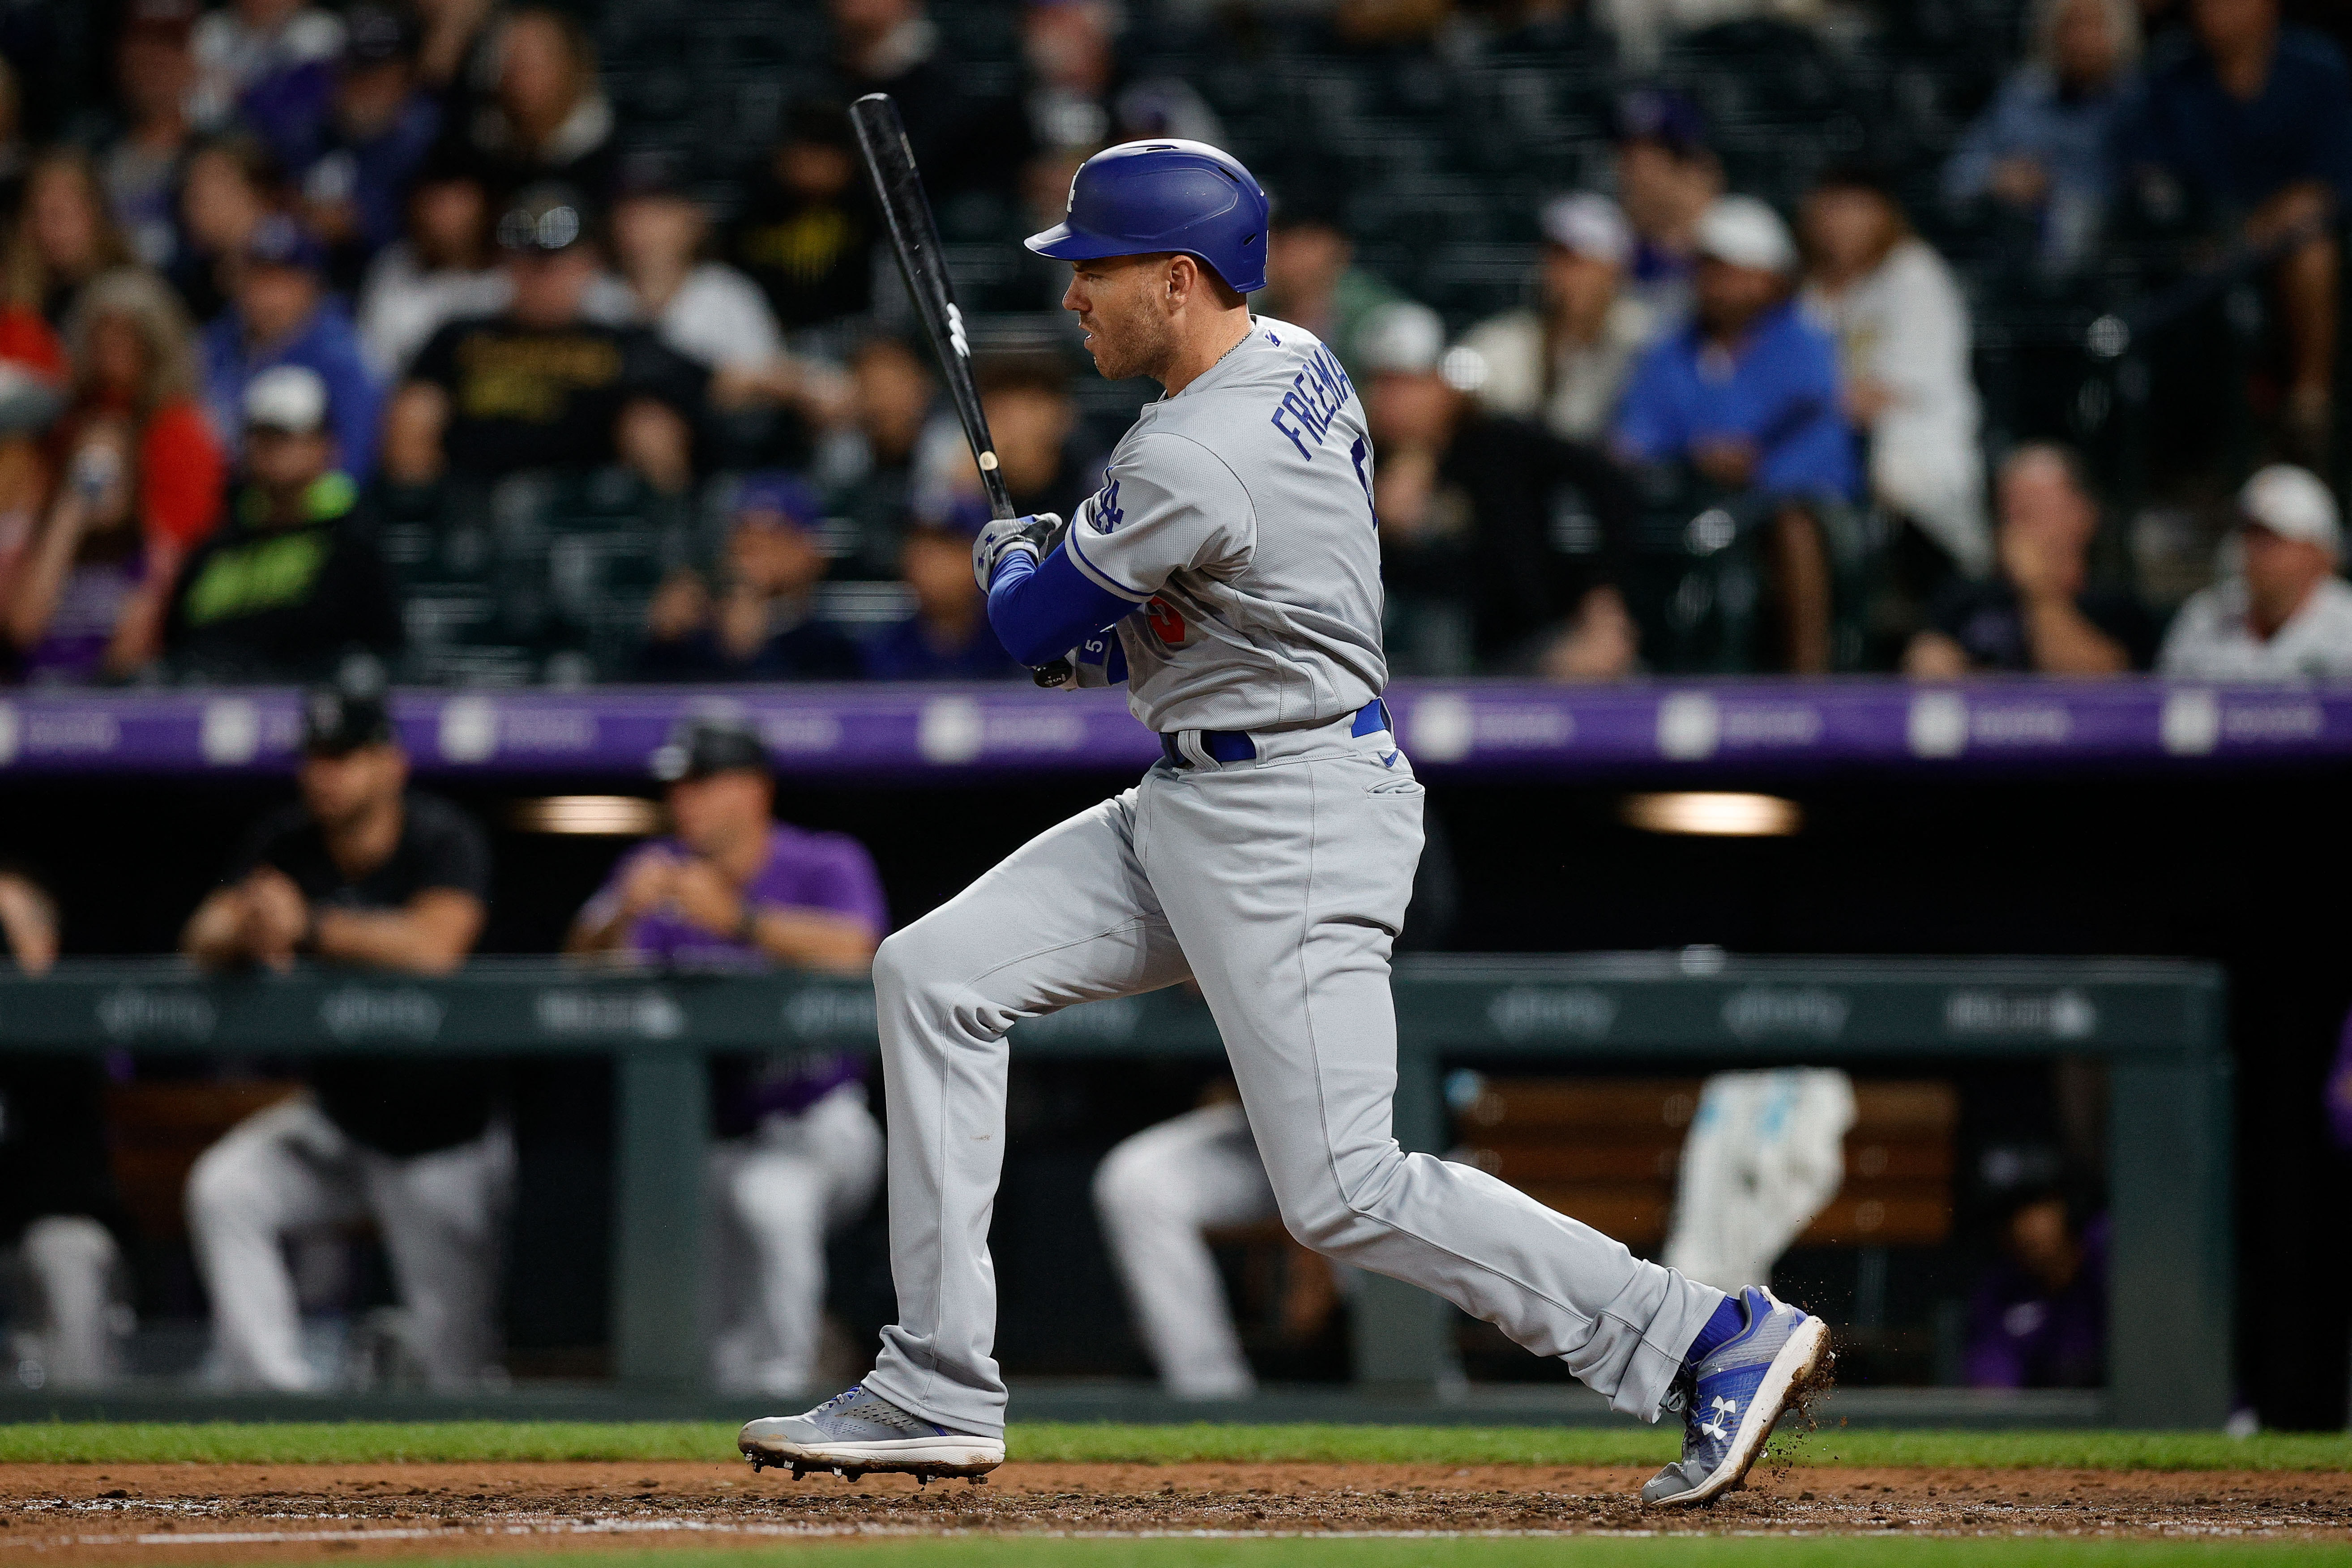 Dodgers drub Rockies in hail-delayed game